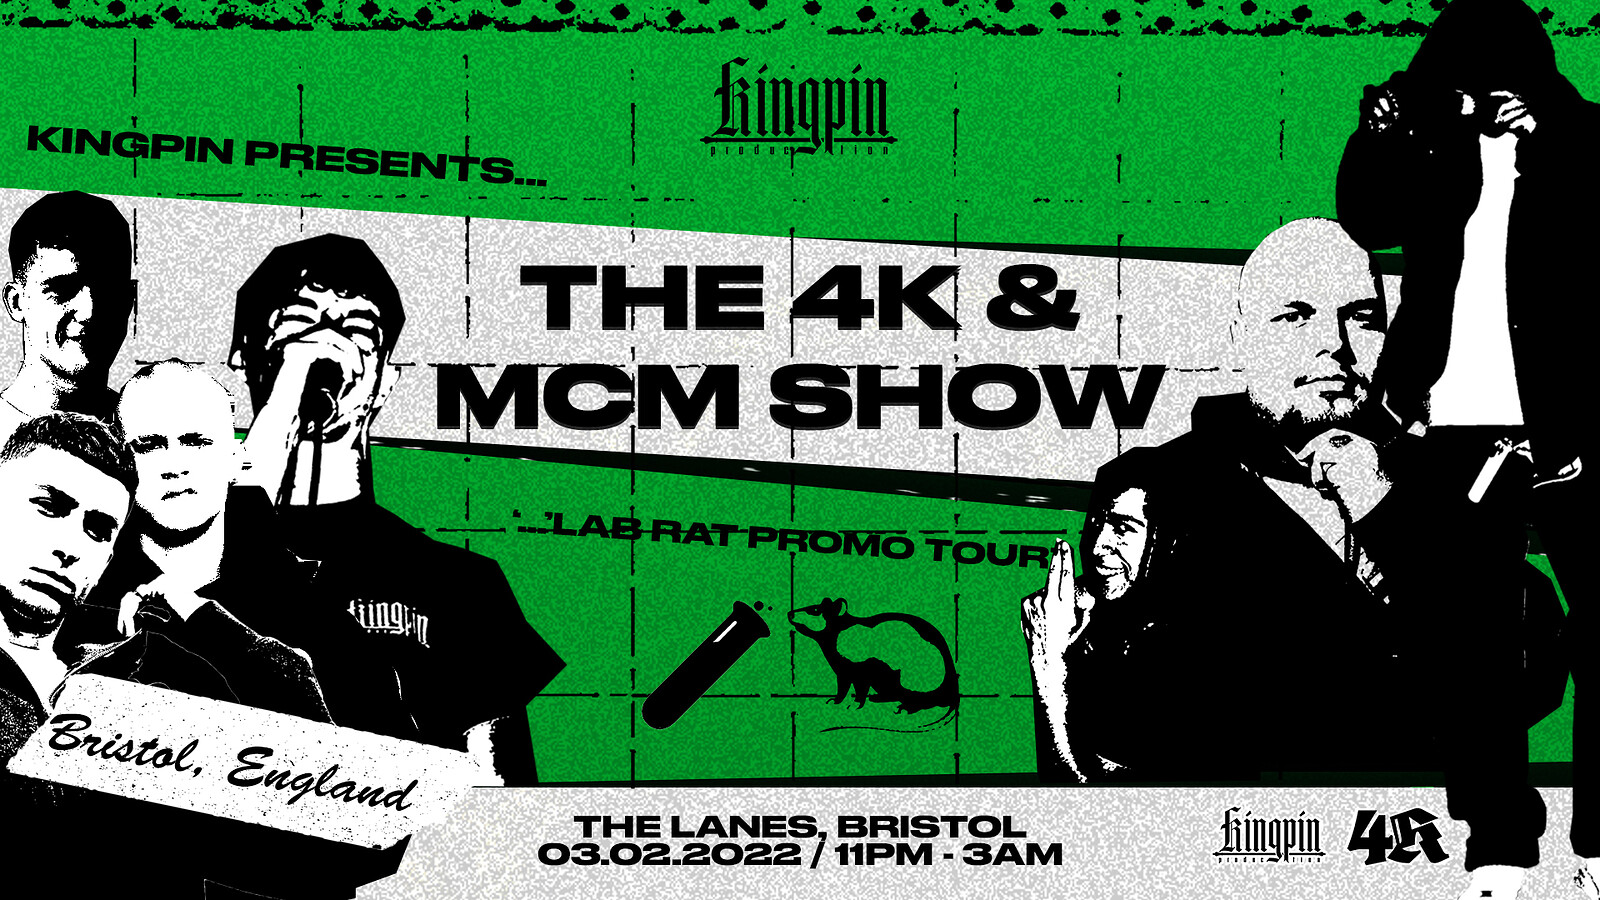 The 4K & MCM Show at The Lanes